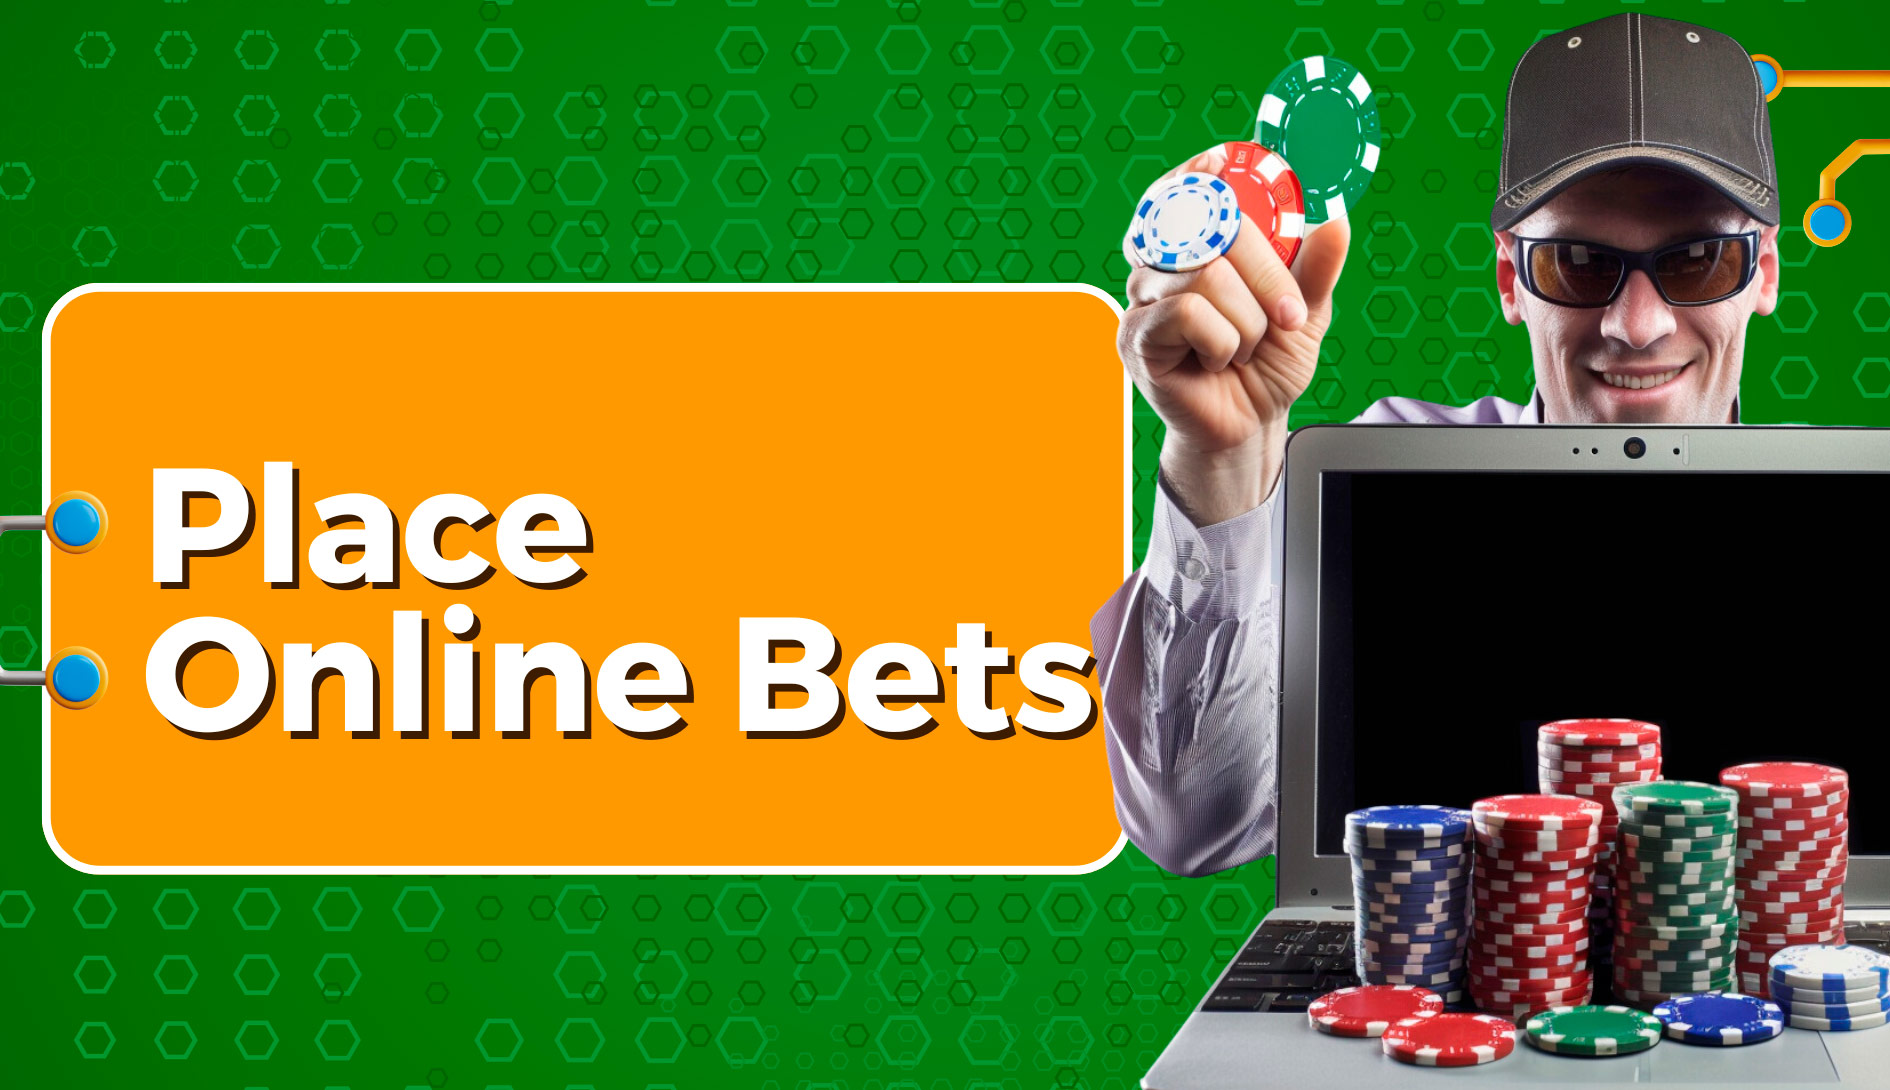 The Ultimate Guide: Where to Place Online Bets for Exciting Sports Action